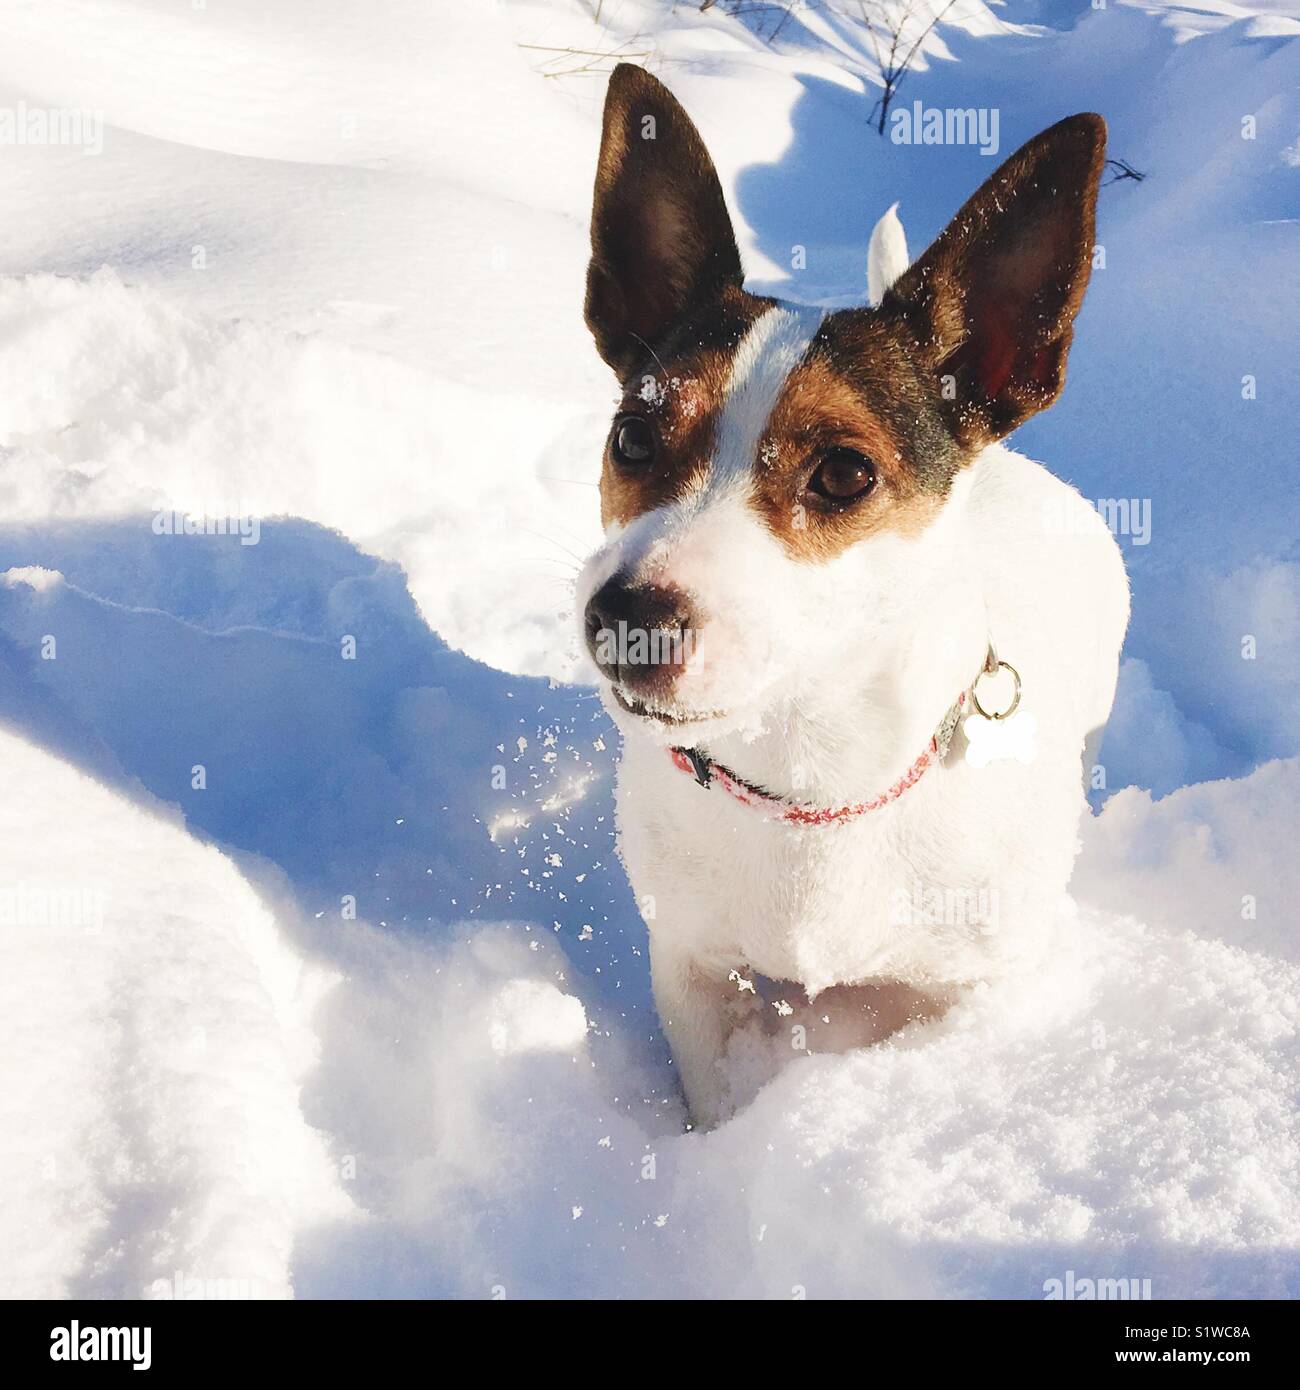 Dog blowing snow off her whiskers on a very cold winter day outdoors. Small snowflakes and her warm breath visible against her shadow. Stock Photo